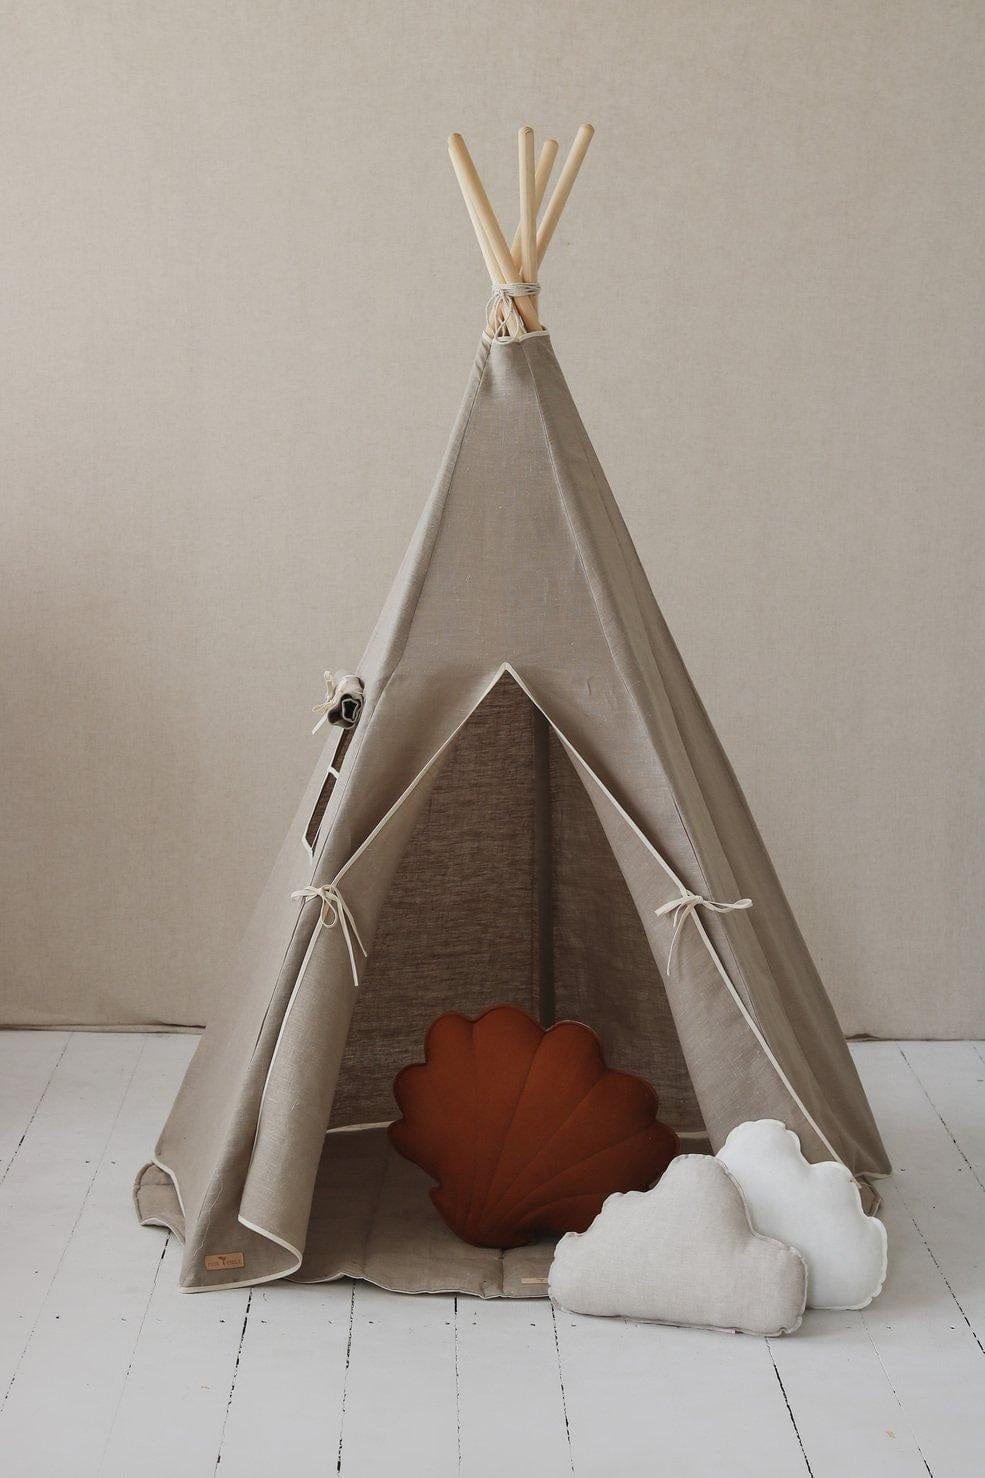 moimili.us Set teepee with mat “Natural Linen” Teepee Tent and Leaf Mat Set